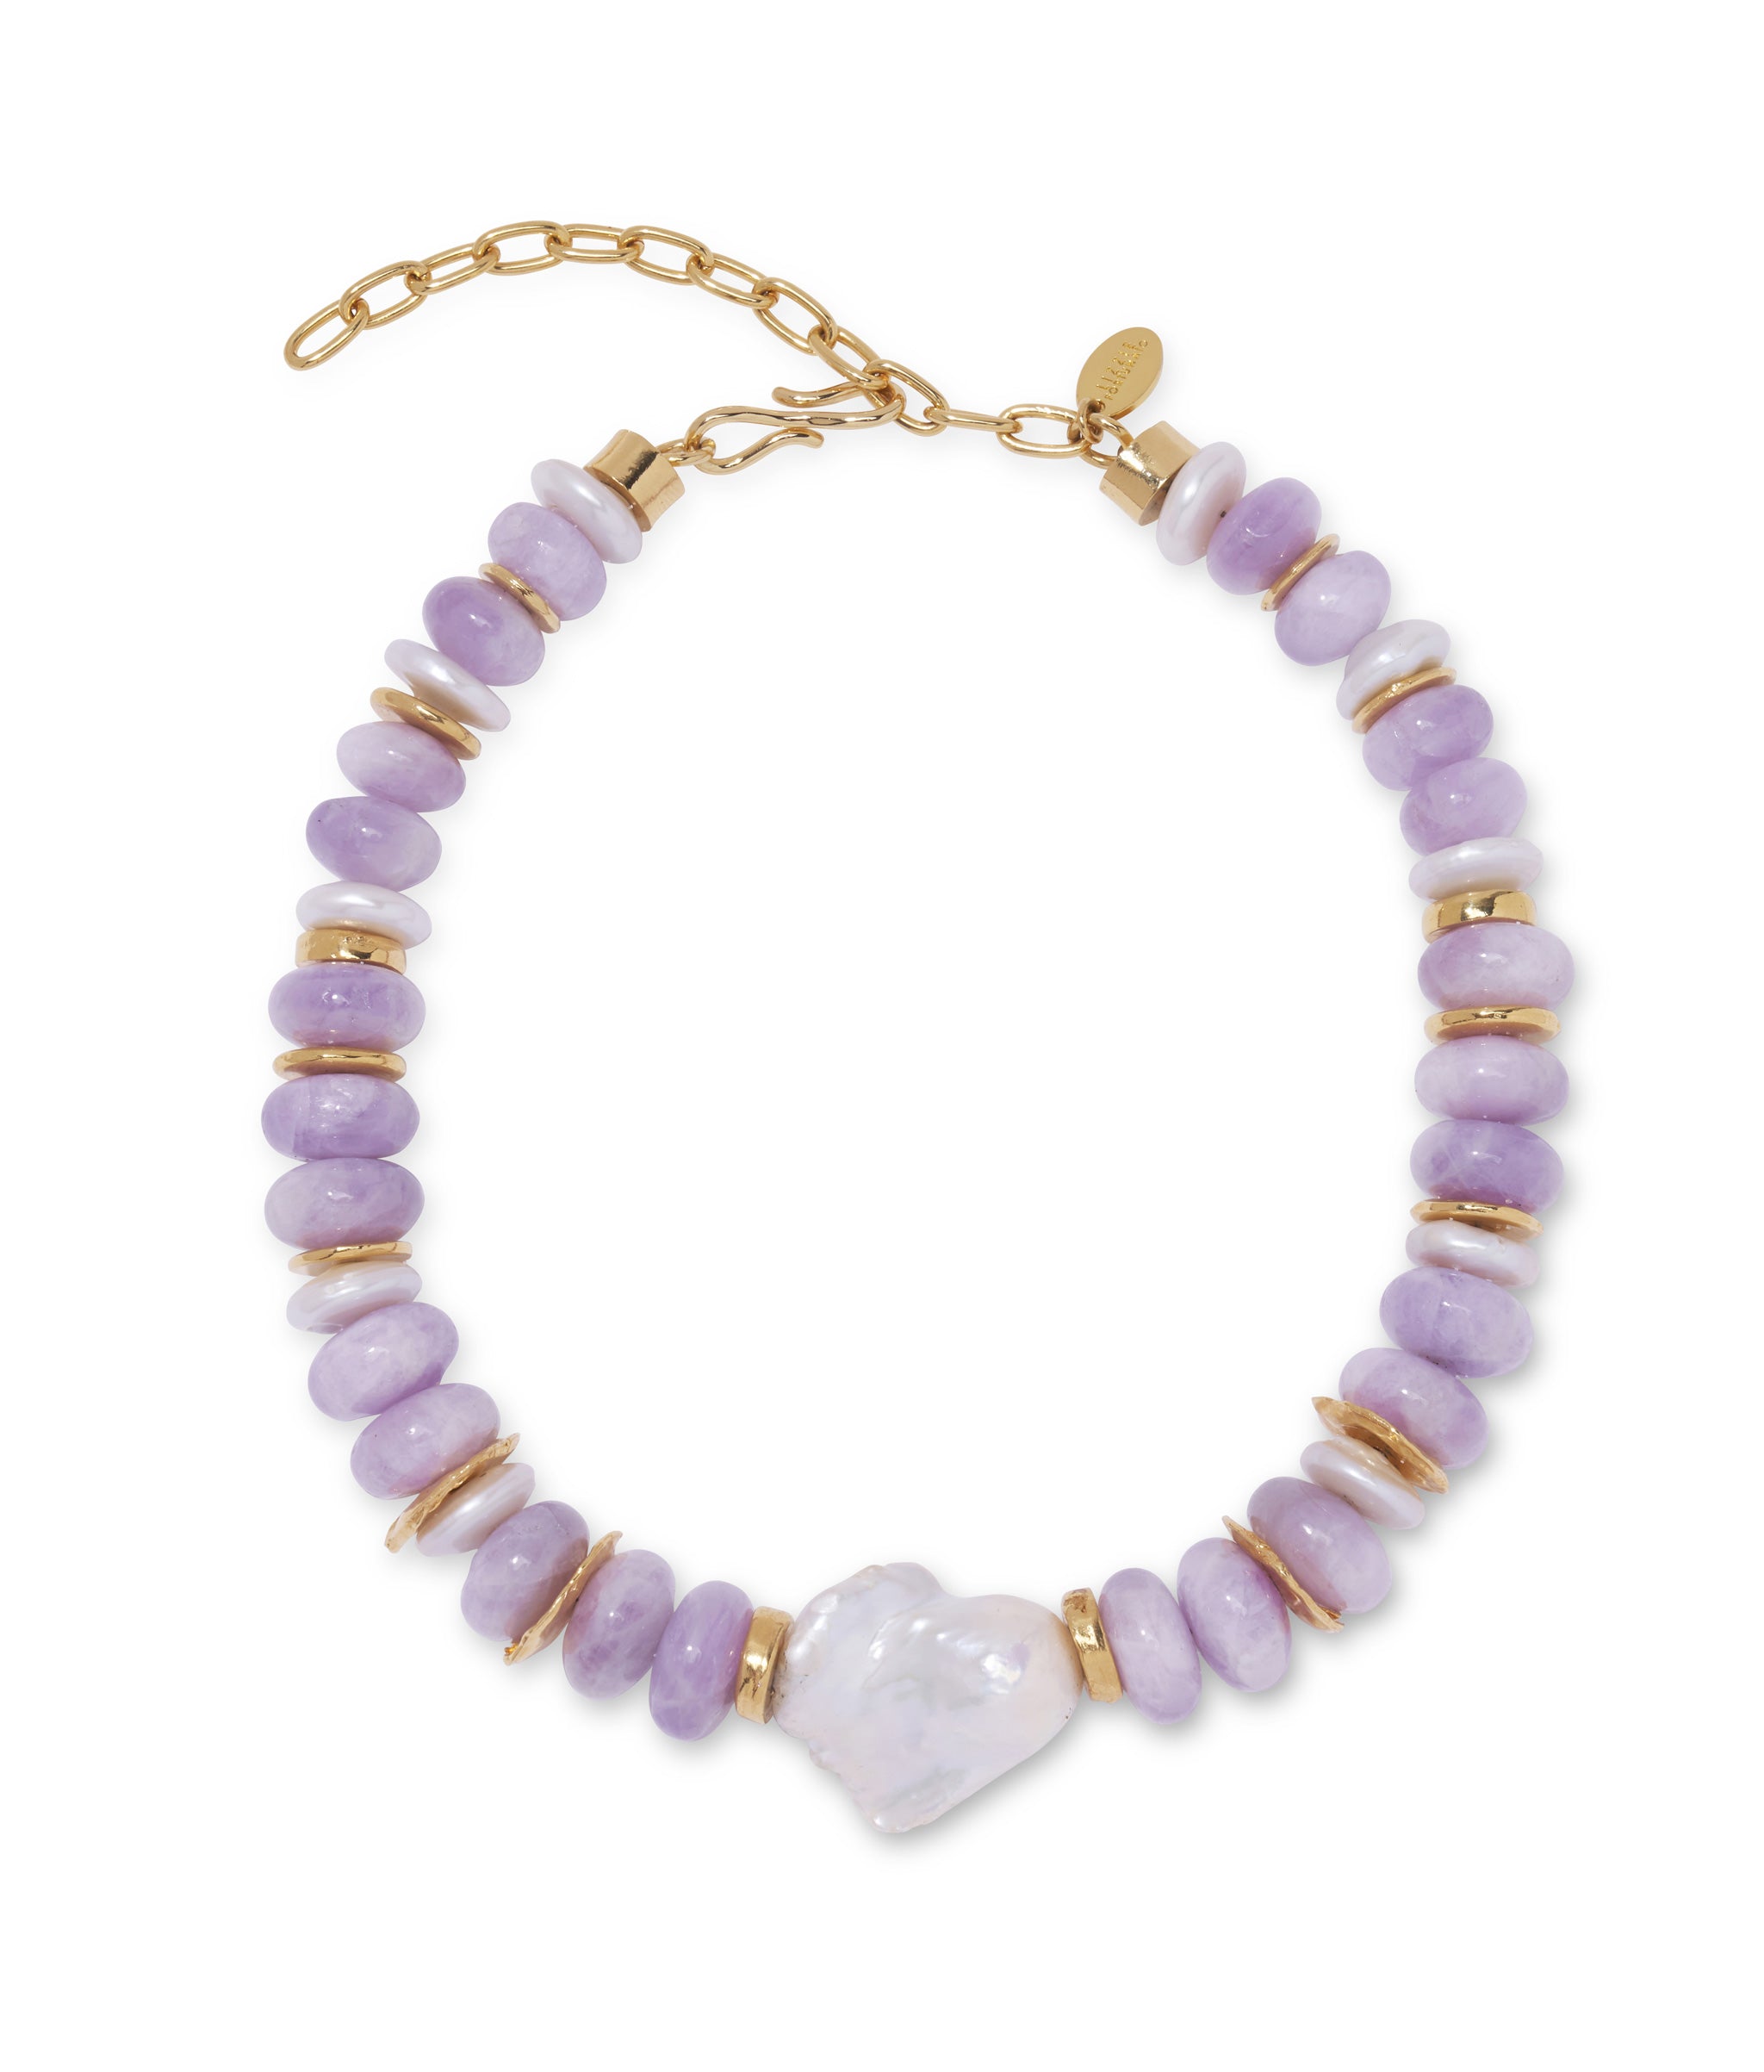 Provence II Necklace. Light purple kunzite beaded collar with large baroque pearl focal bead.